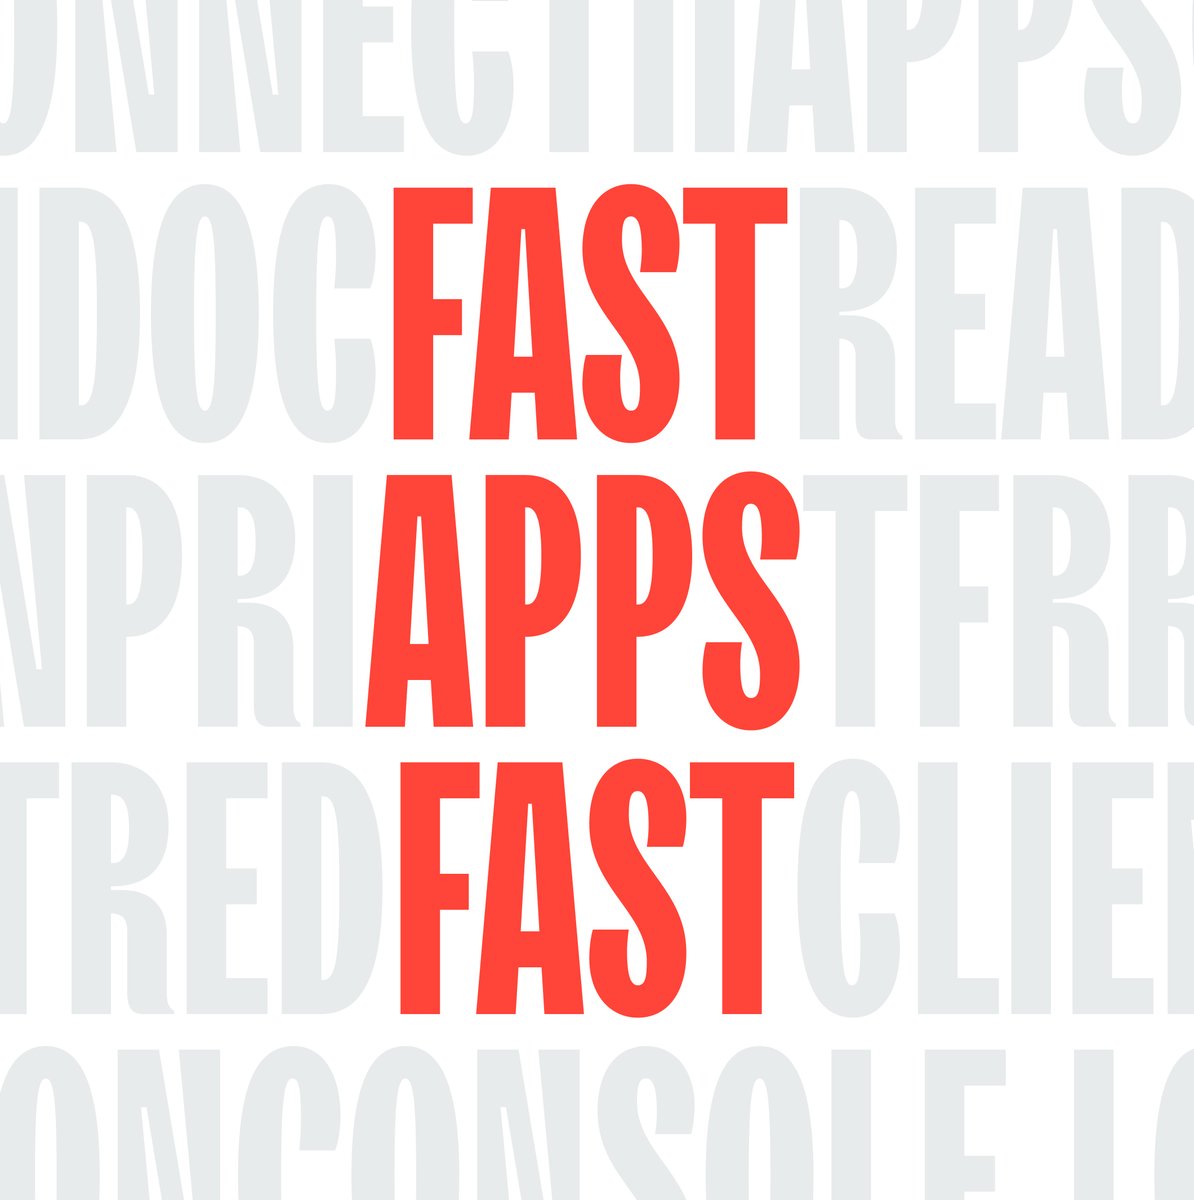 Fast apps fast. It’s what we do. Deliver flawless UX at any scale. redis.io